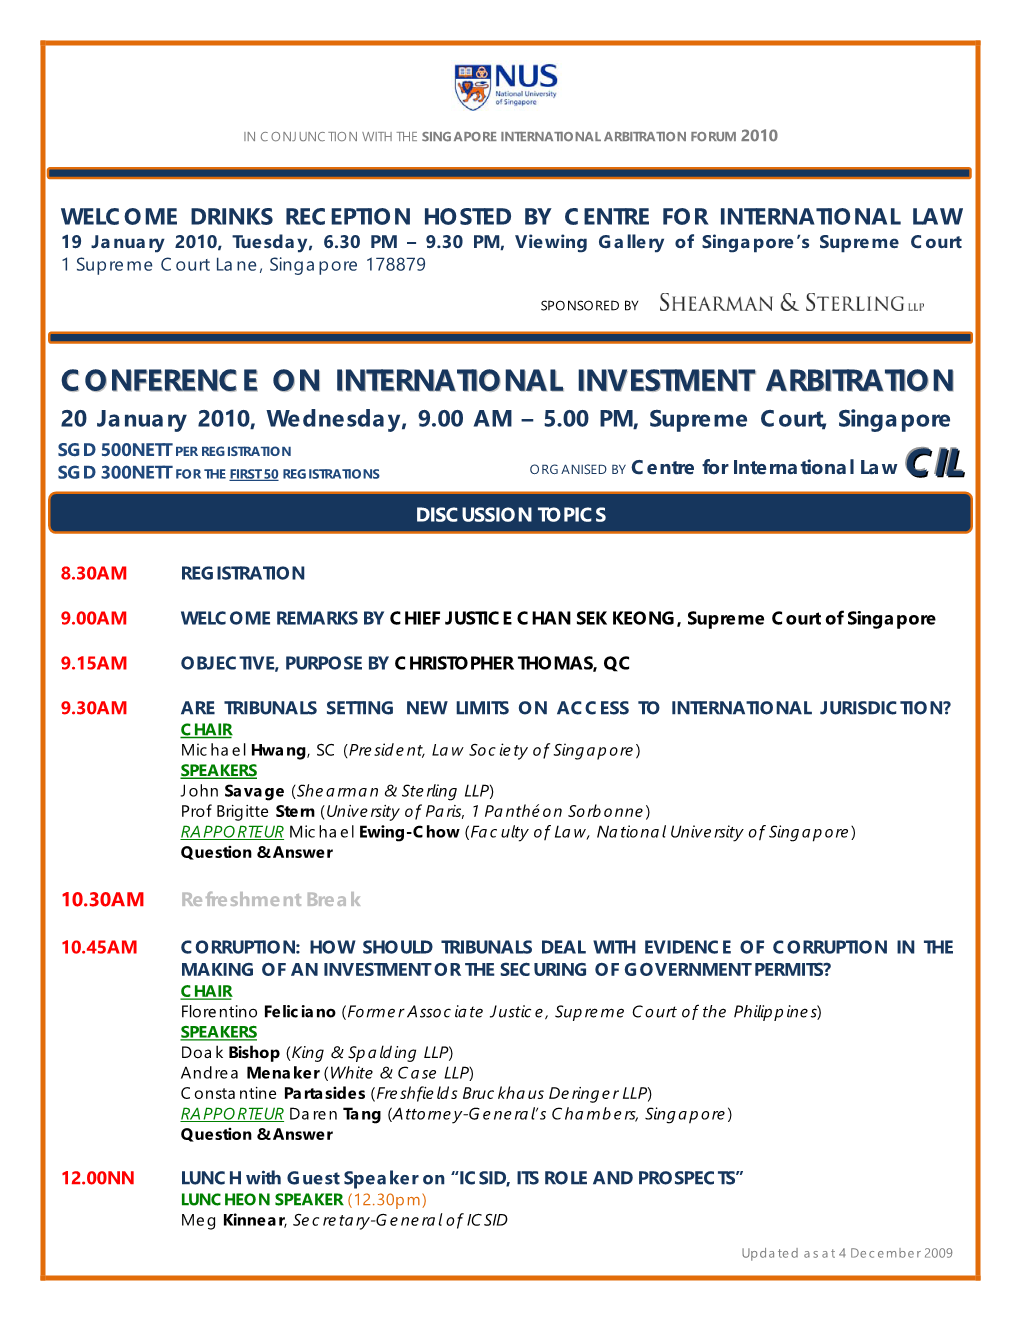 An ICSID Conference